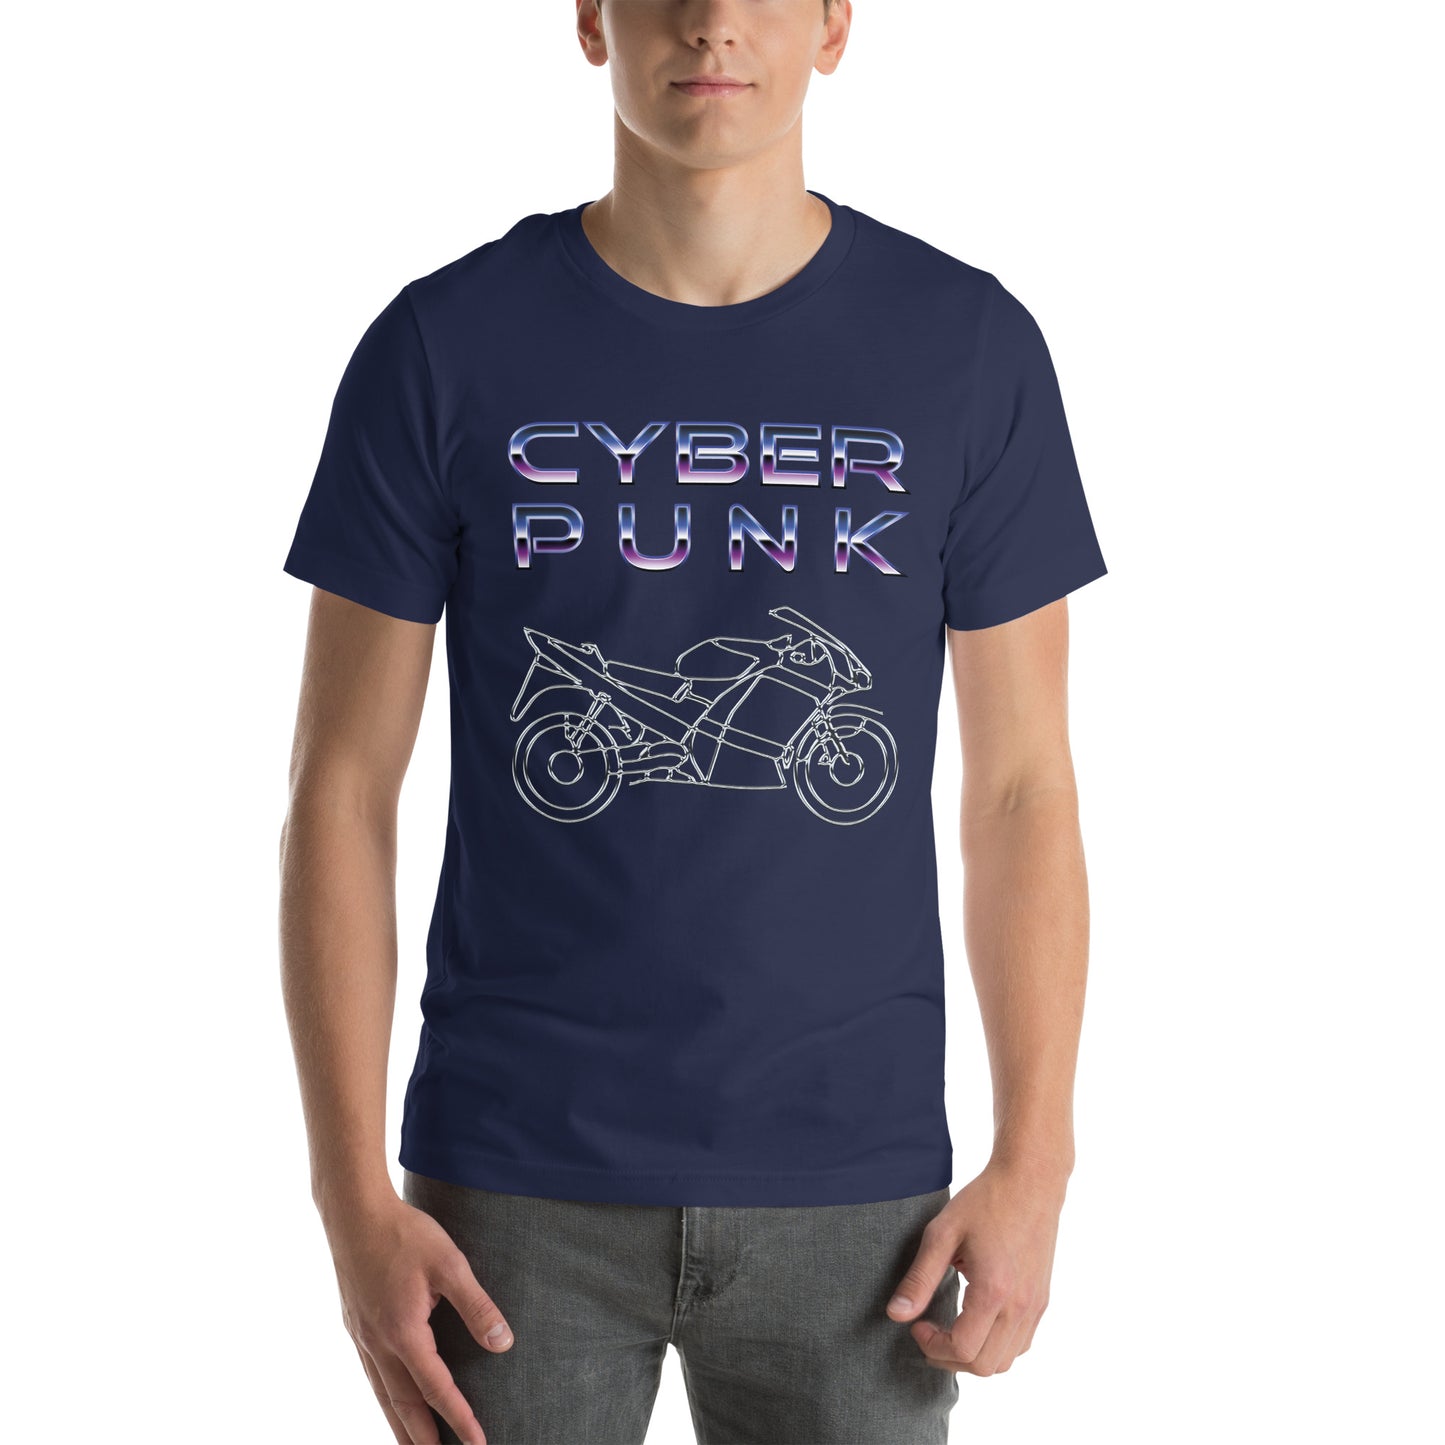 Navy blue T-Shirt featuring a chrome motorbike design and bold 'CYBER PUNK' title text above, from the TEQNEON Neolific and Word Craft collections